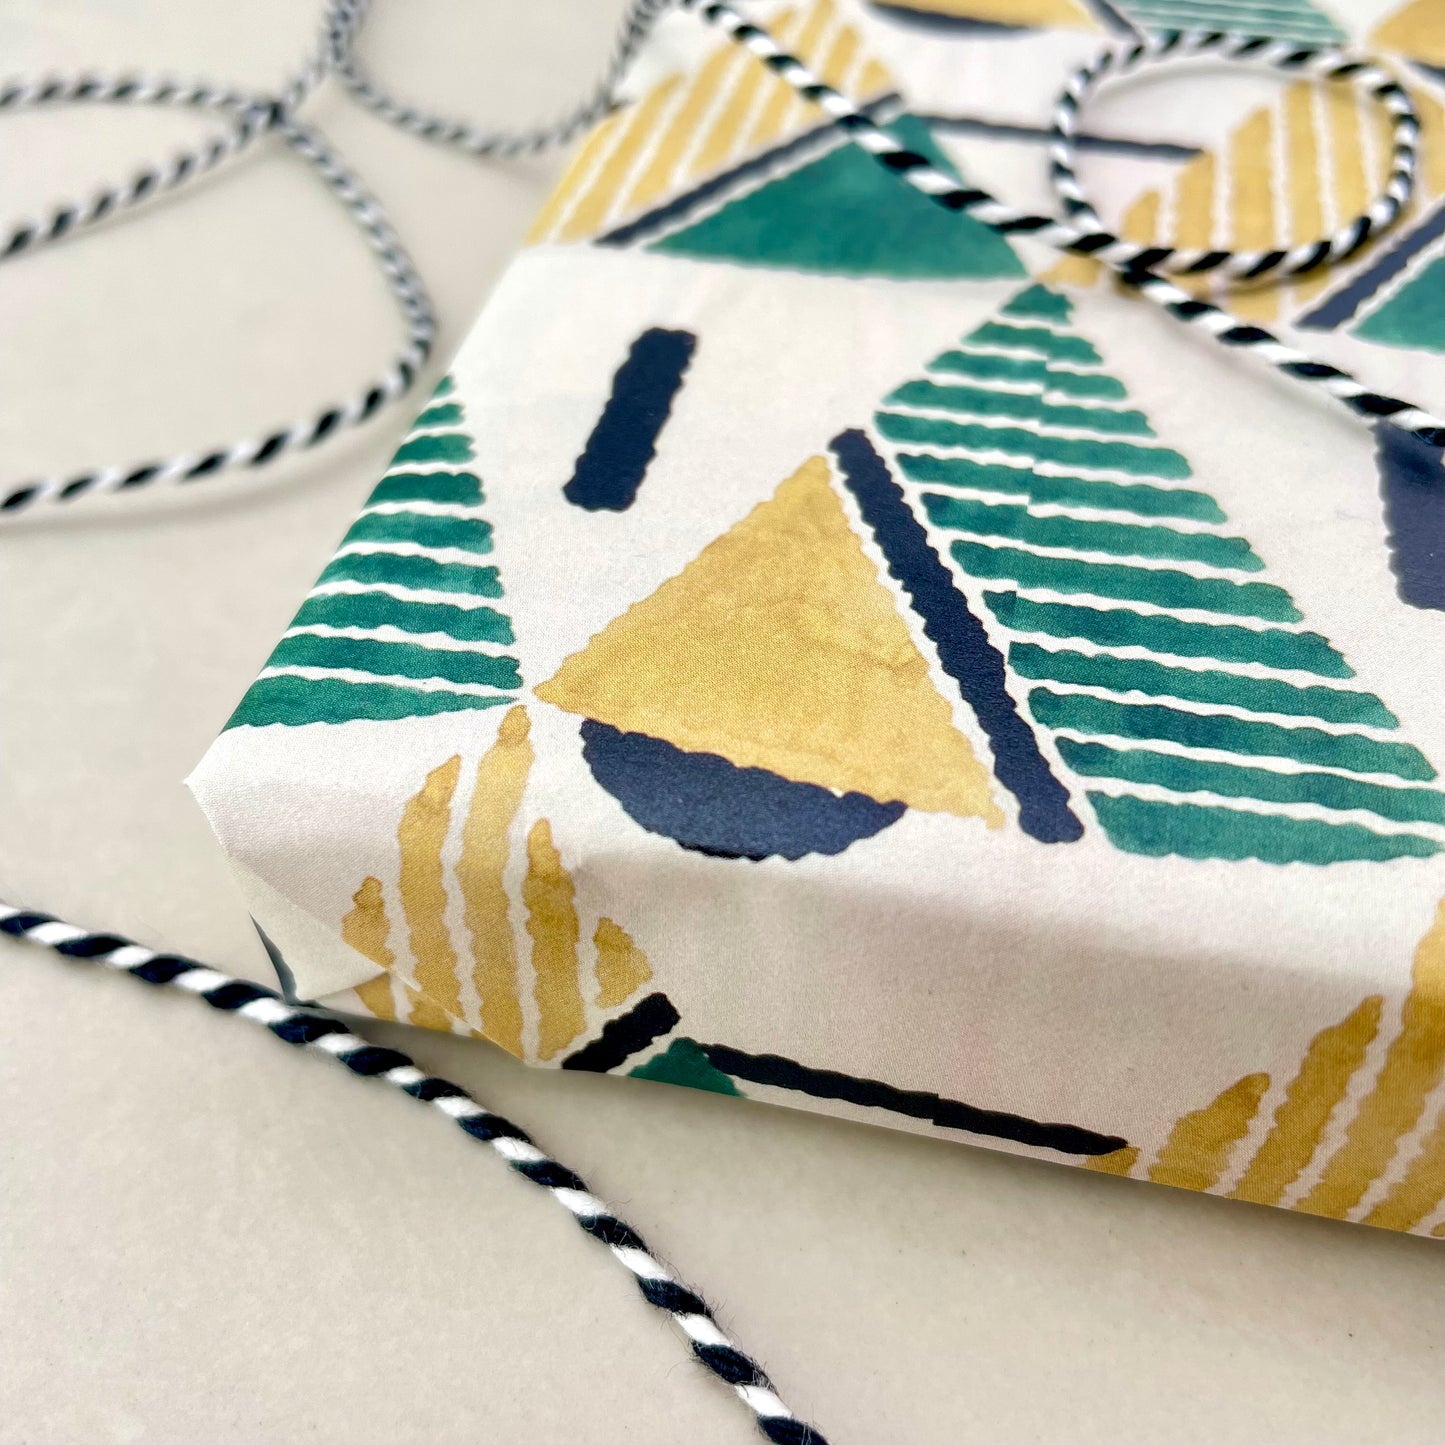 wrapping paper with yellow and green triangular geometry repeat design, wrapped present, detail